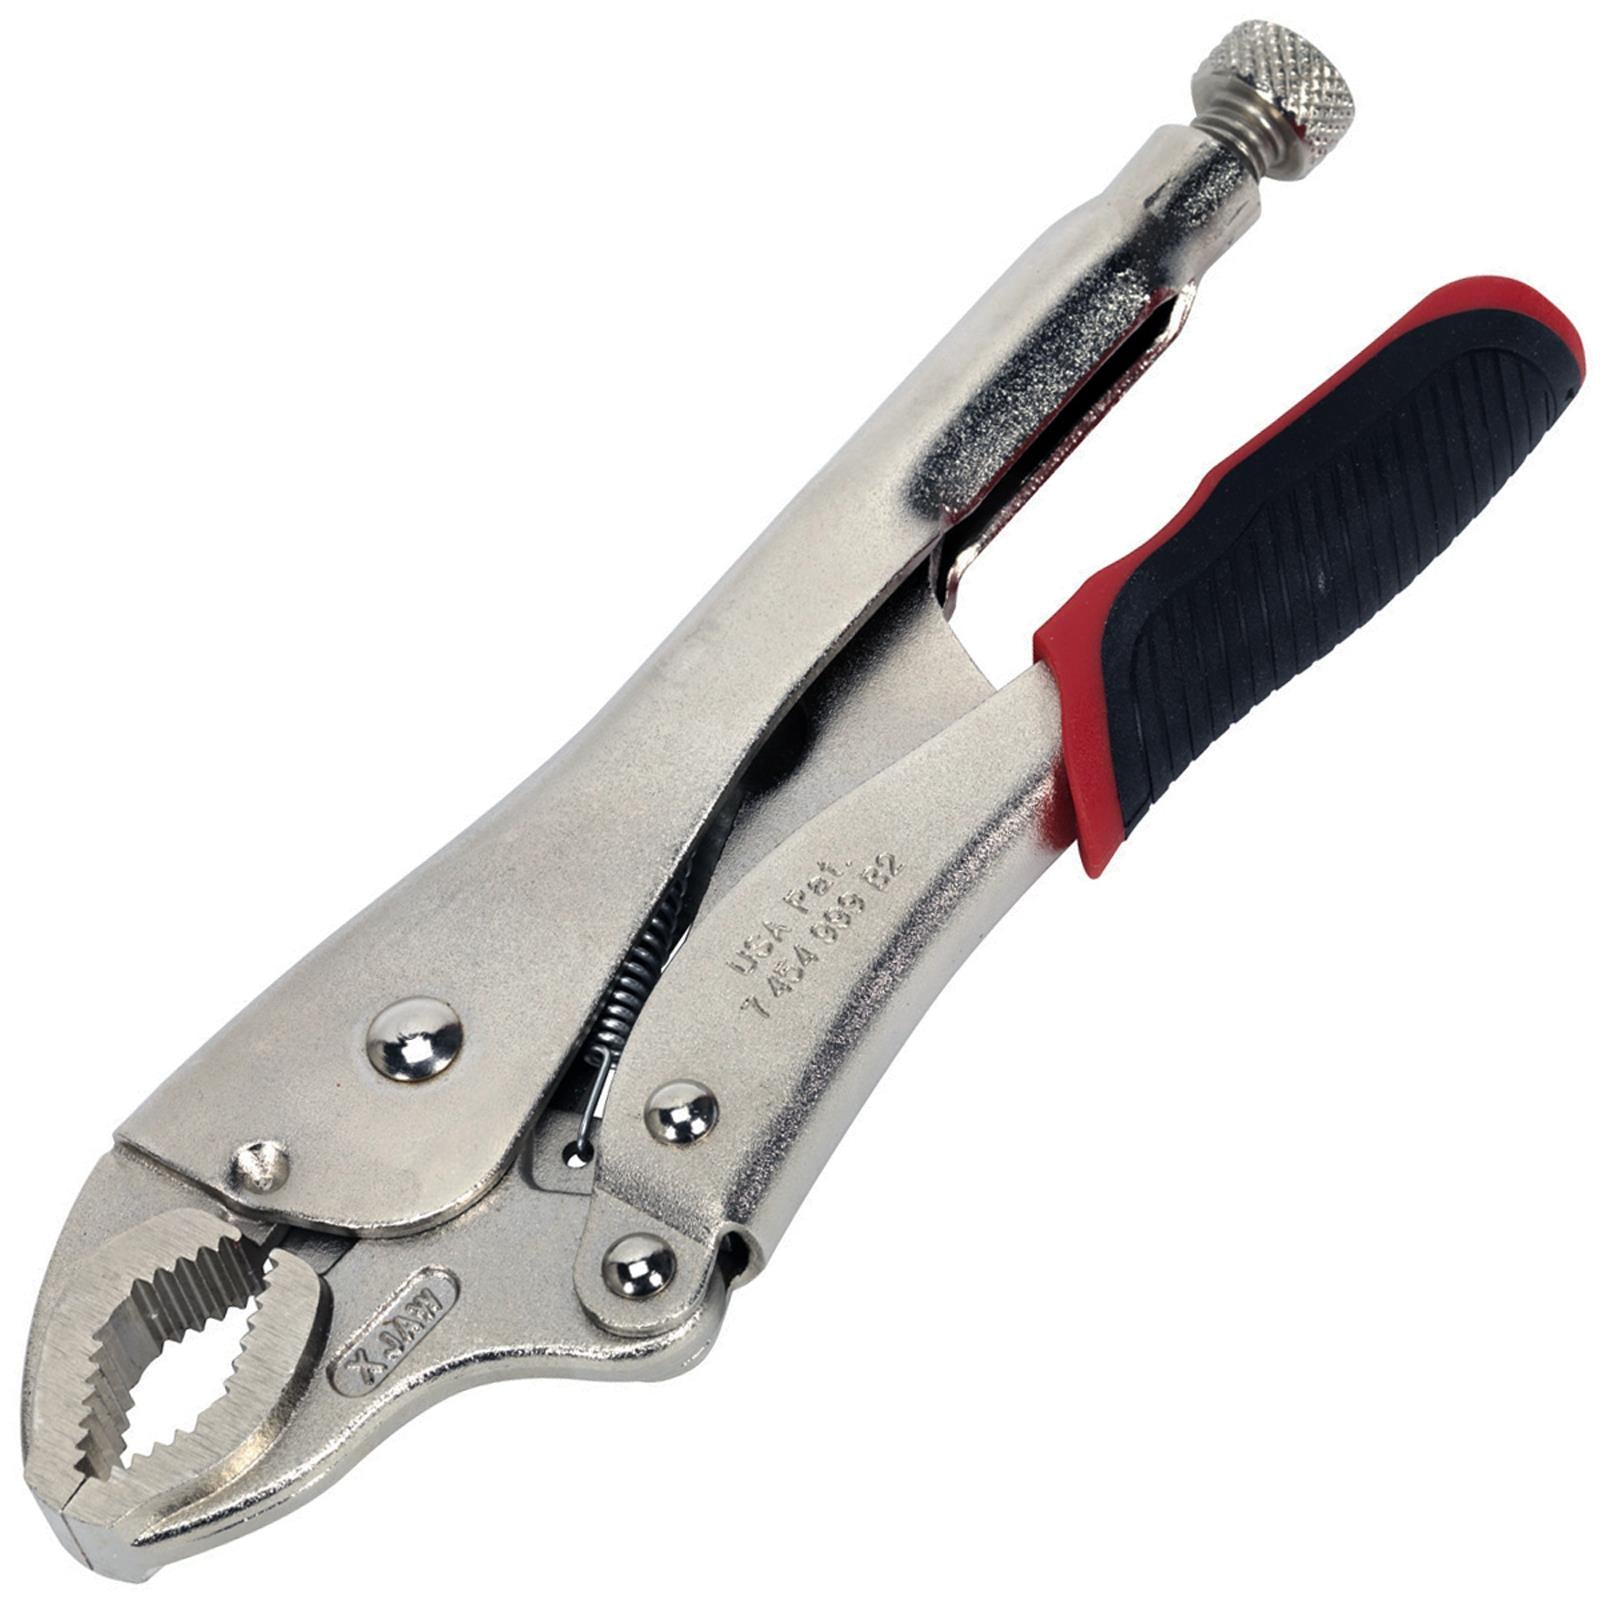 Sealey Premier 220mm Xtreme Grip Quick Release Locking Pliers 0-45mm